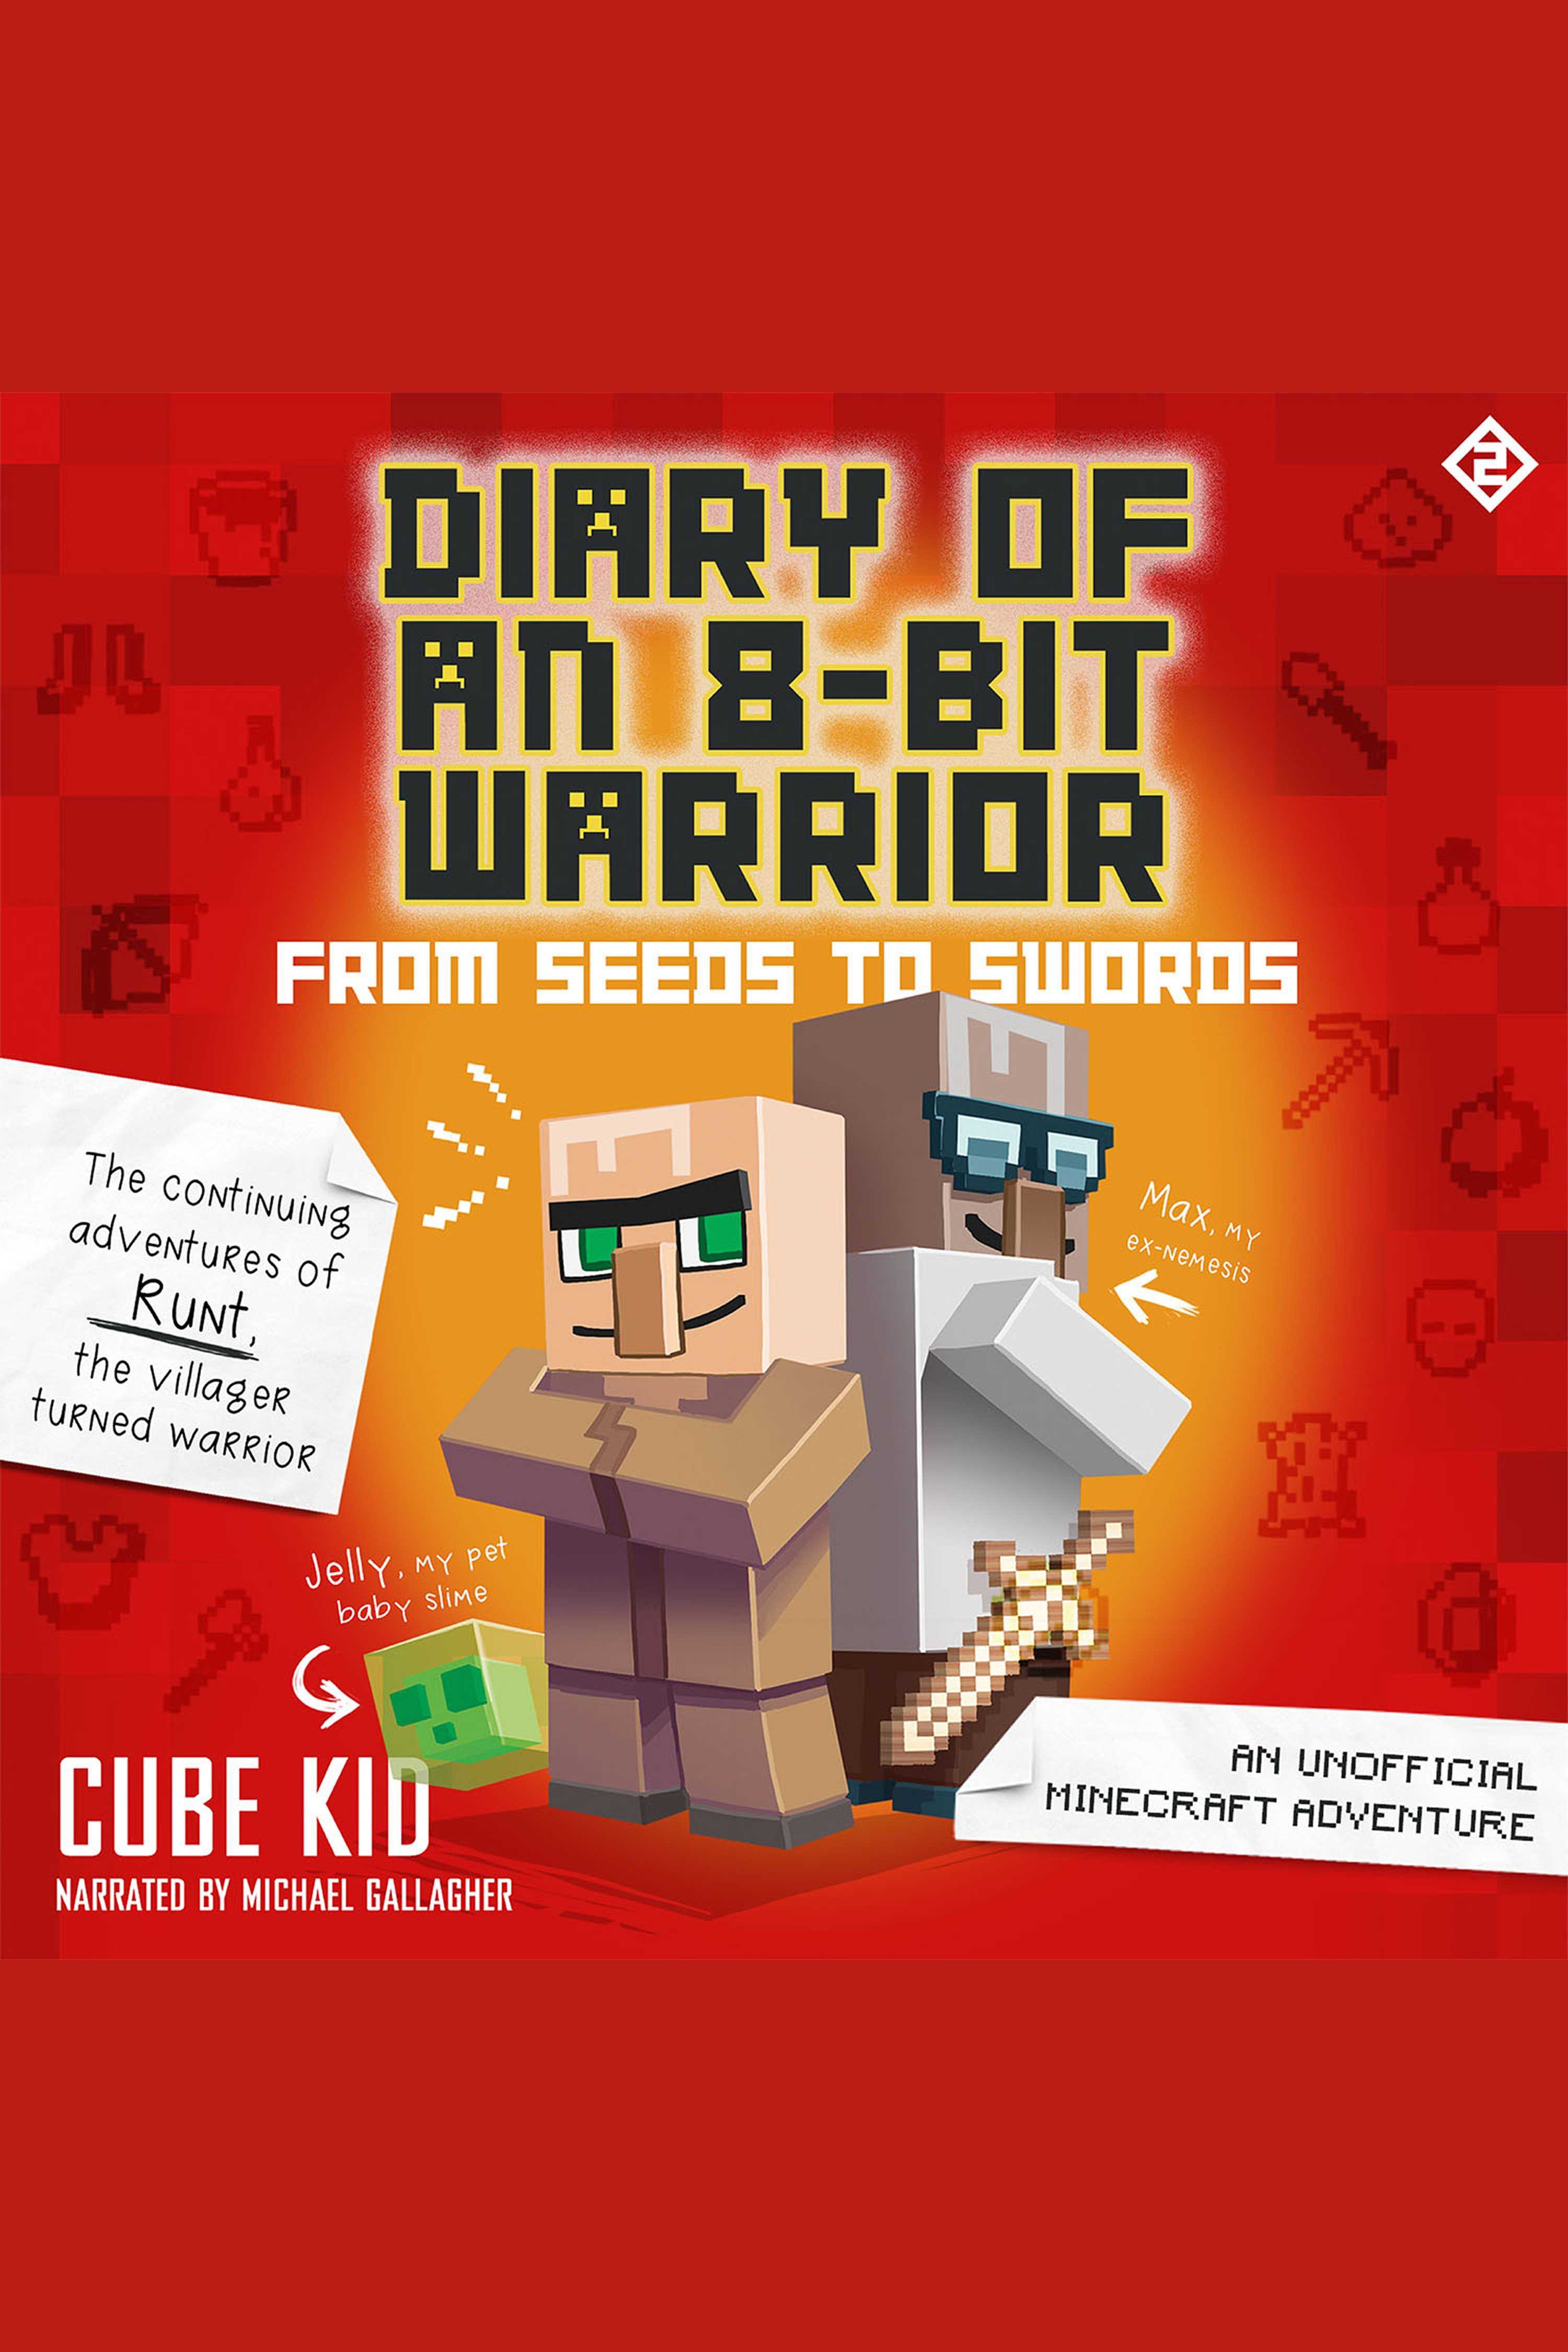 Diary of an 8-Bit Warrior: From Seeds to Swords An Unofficial Minecraft Adventure